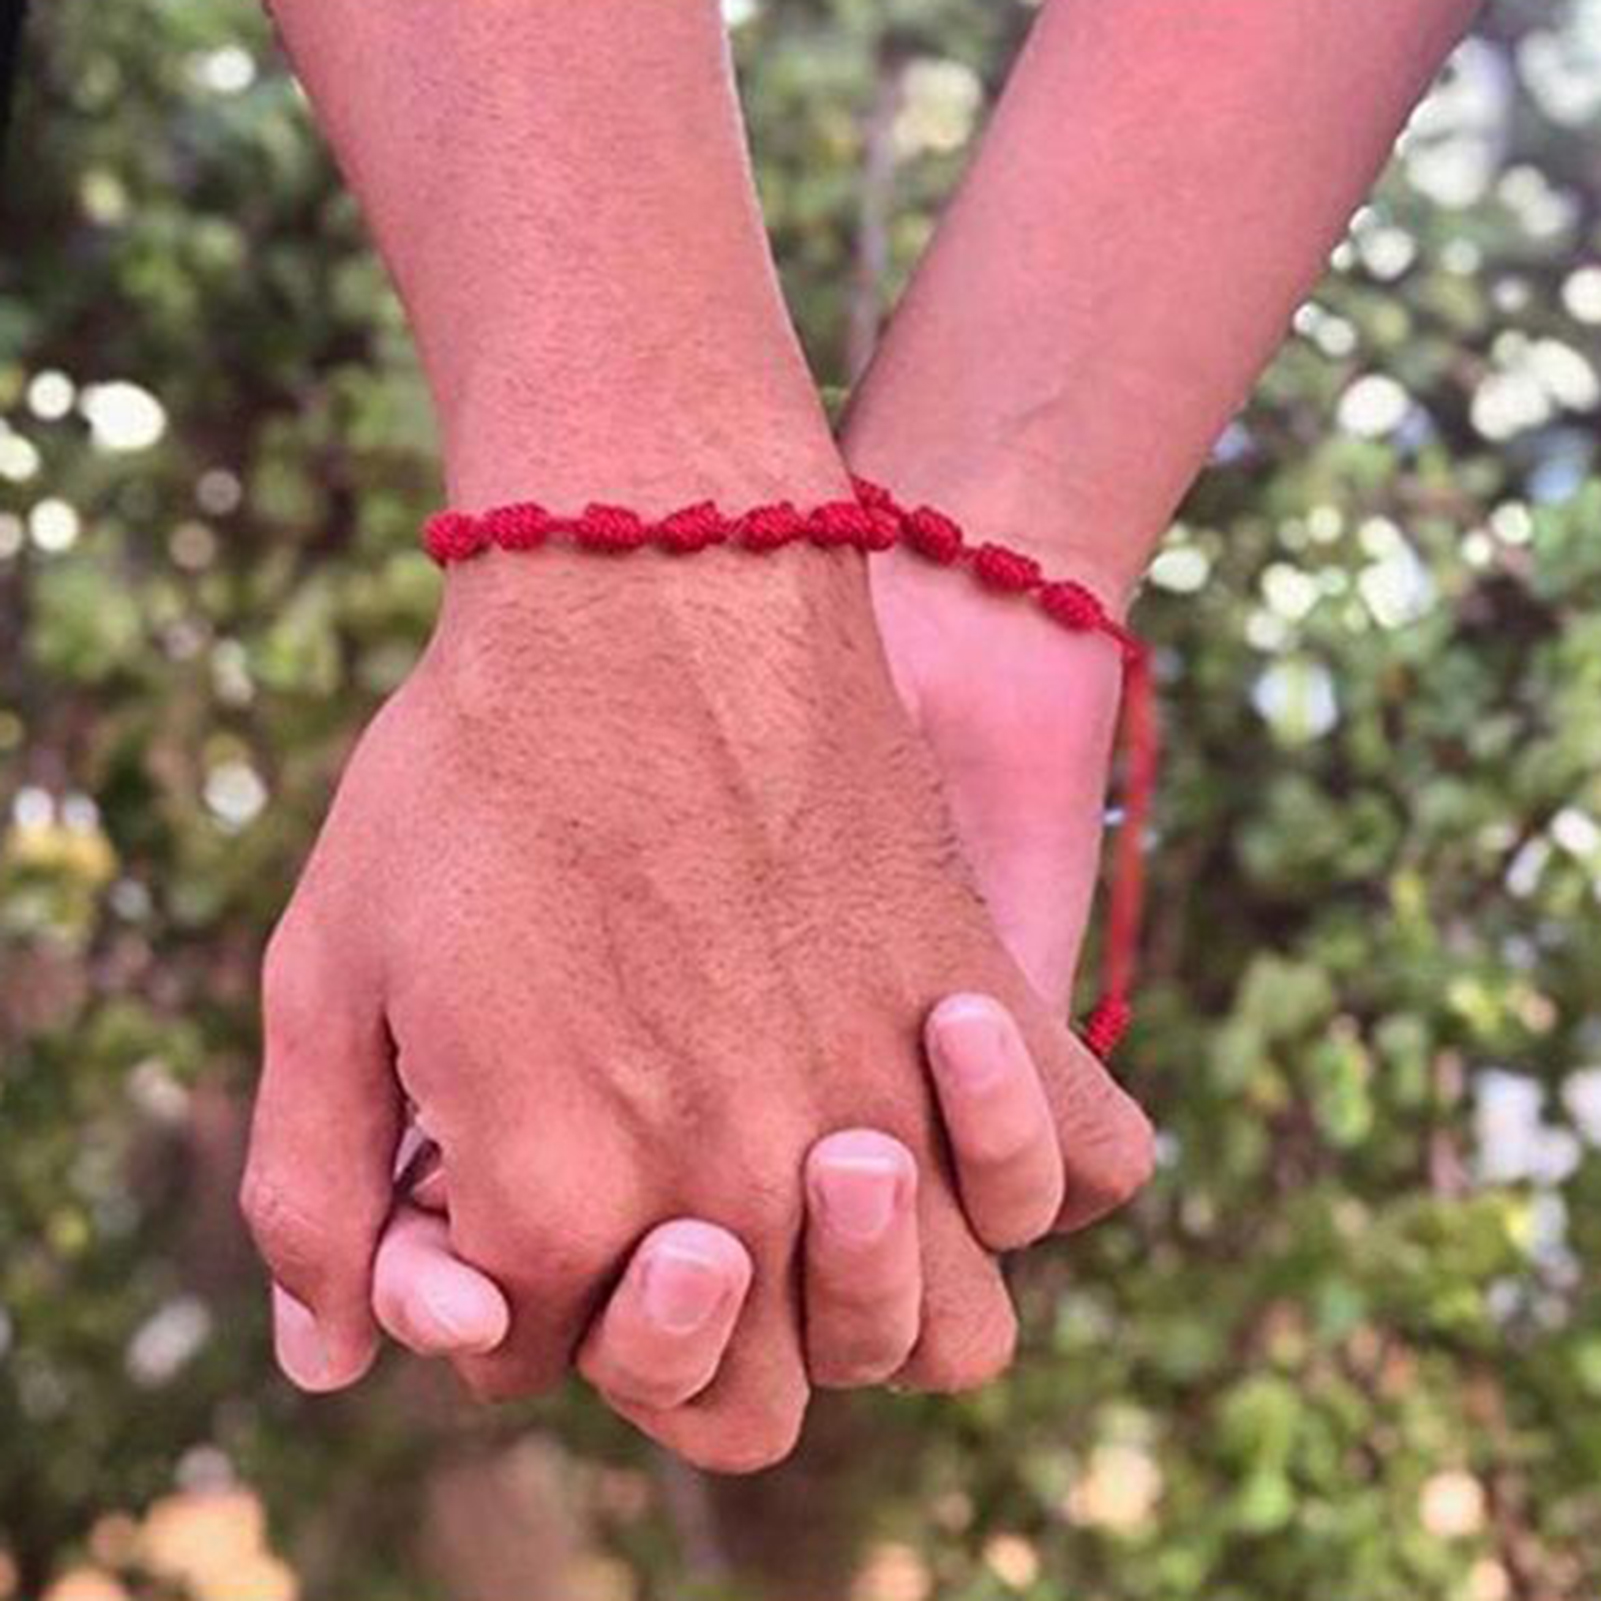 Grofry 2Pcs Lucky Red String Bracelets 7 Knots Protection Rope